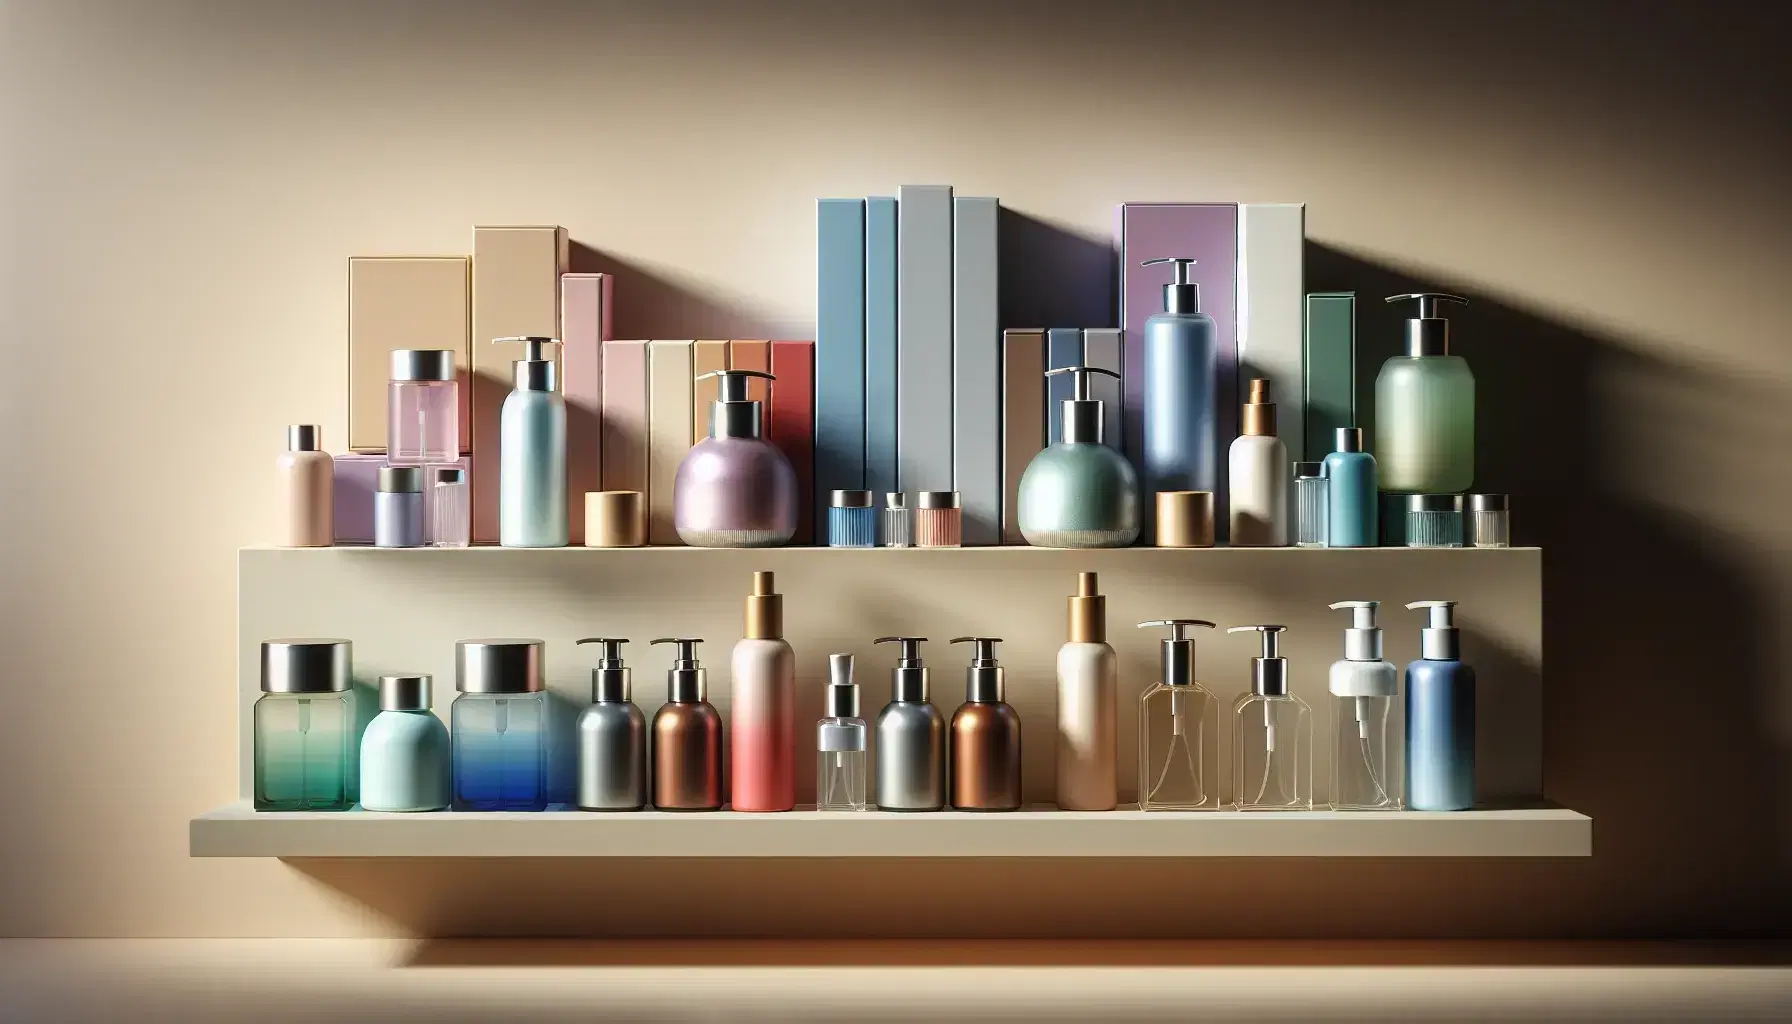 Assorted beauty products on a shelf, featuring pastel-colored liquid bottles, bold square boxes, frosted glass containers with gold lids, and gradient purple-to-clear tall bottles.